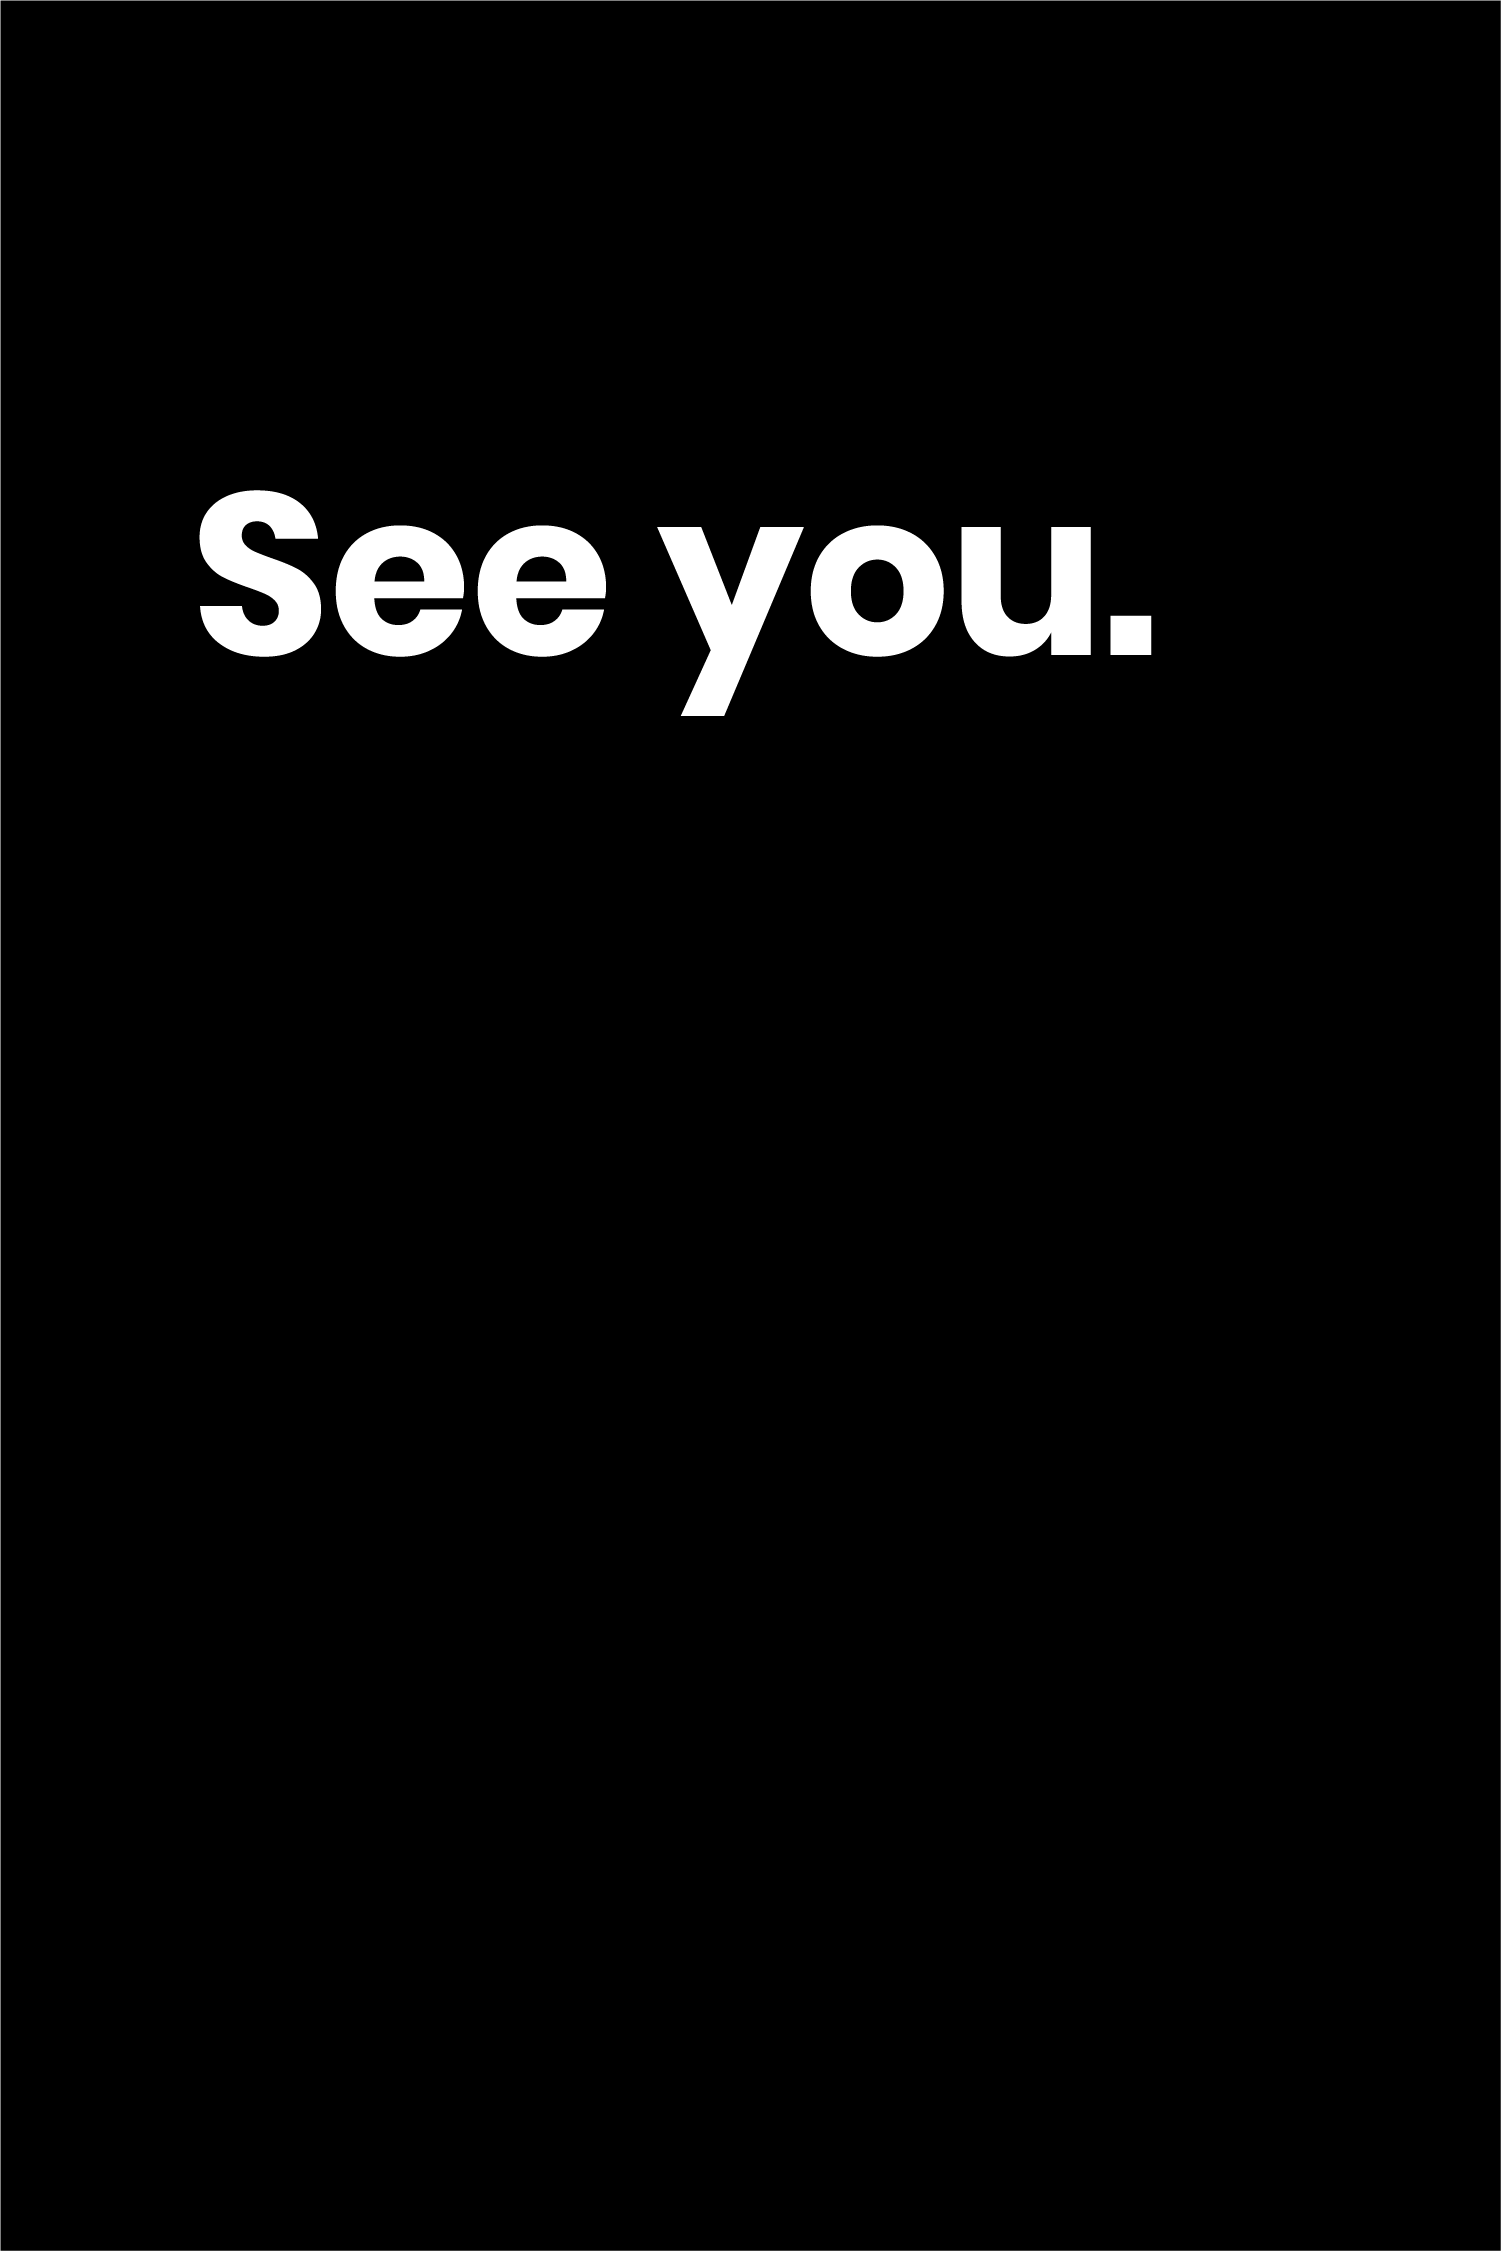 See you.